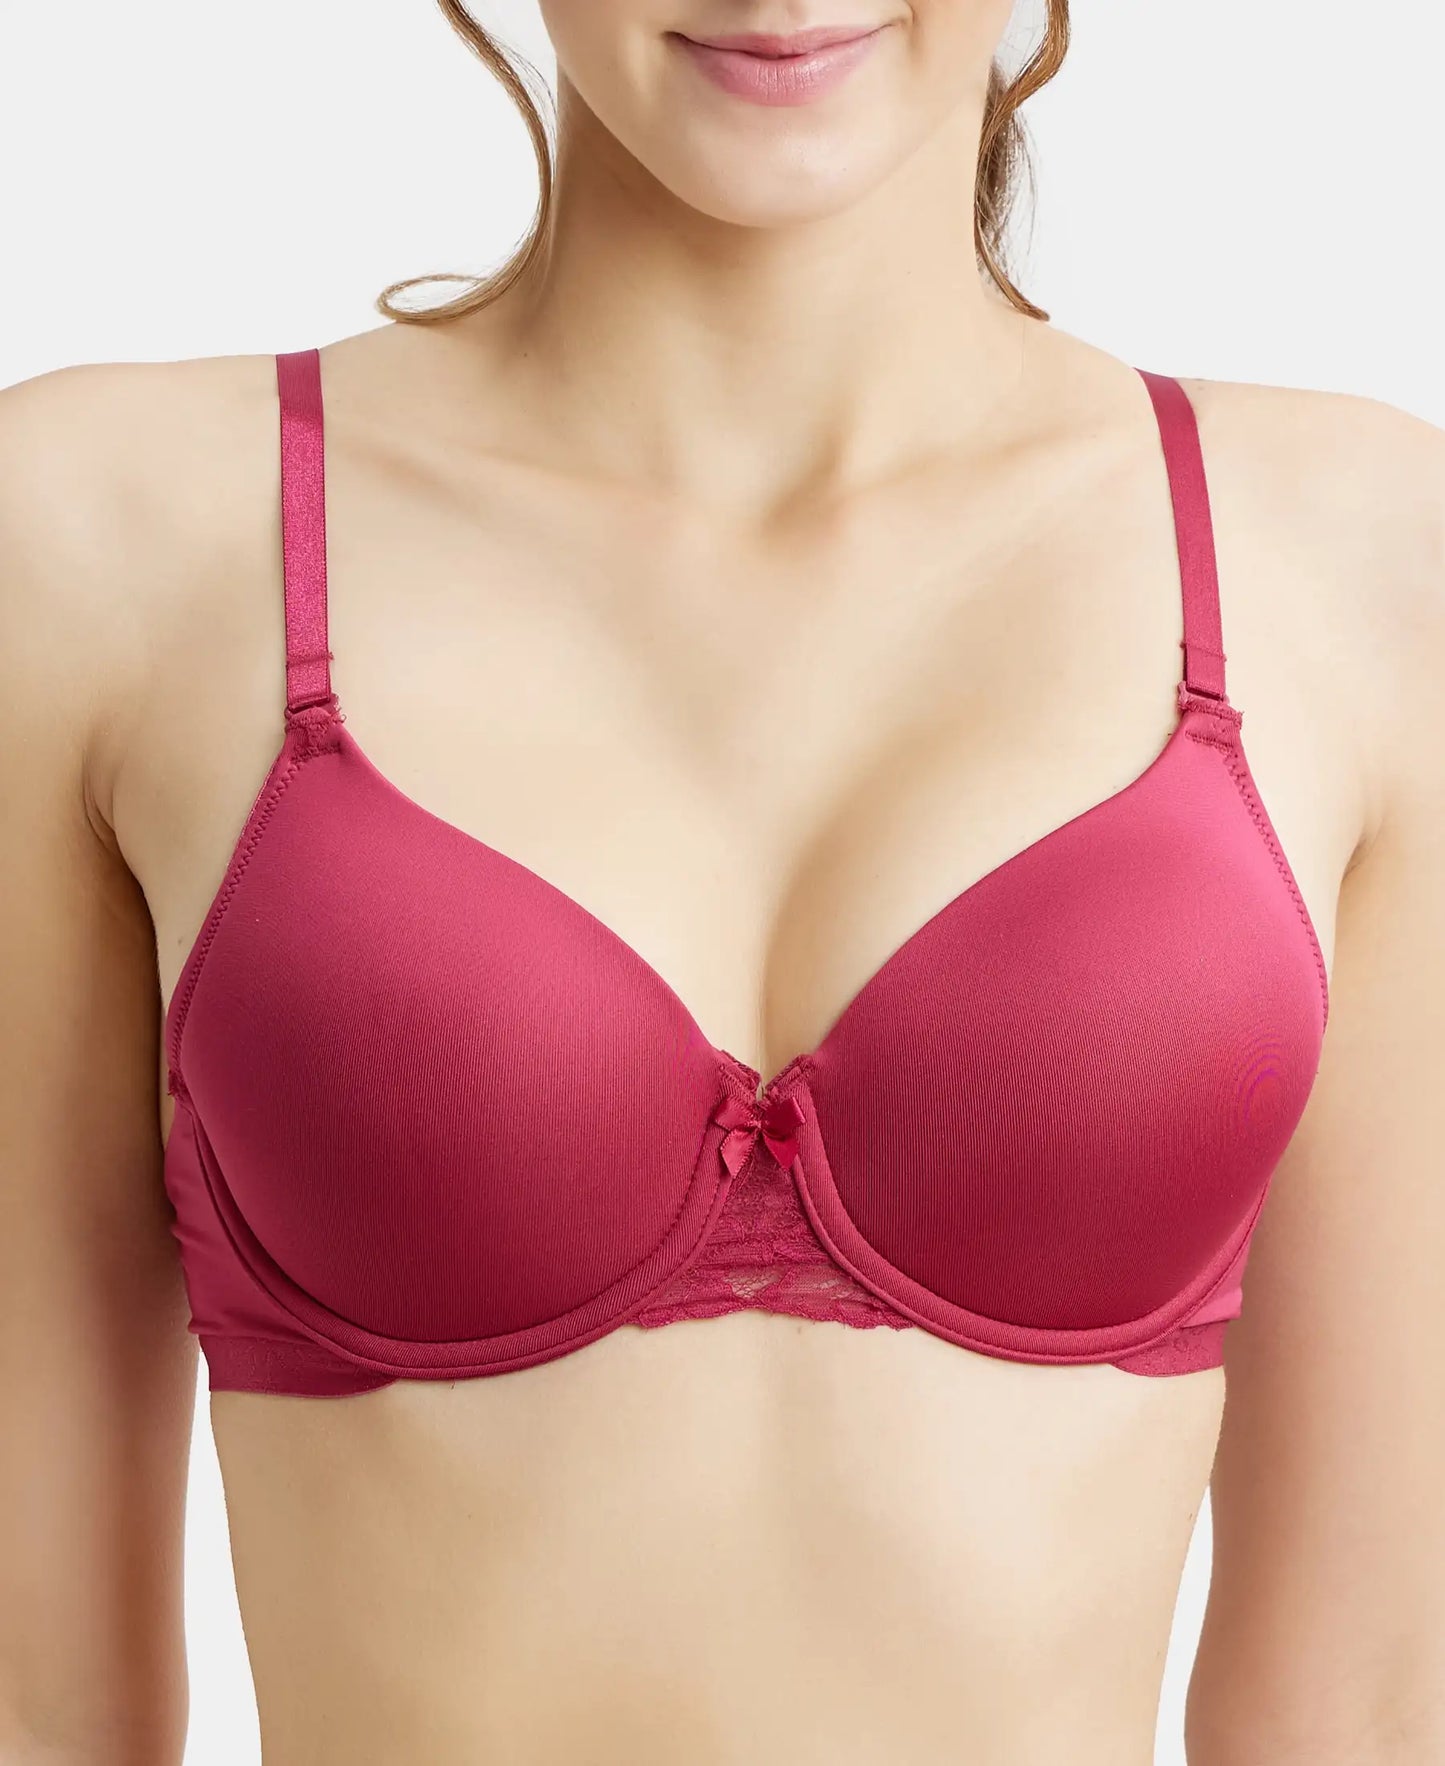 Under-Wired Padded Soft Touch Microfiber Elastane Full Coverage T-Shirt Bra with Lace Styling - Anemone-6